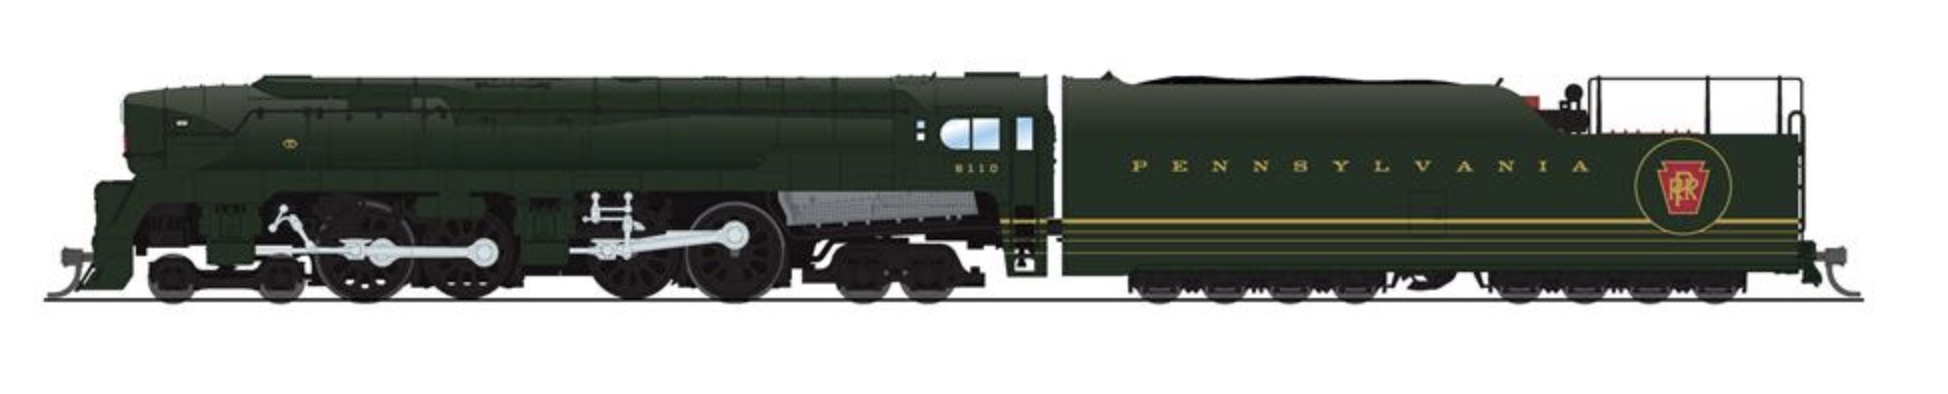 N Scale - Broadway Limited - 9026 - Locomotive, Steam, 4-4-4-4 T1 - Pennsylvania - 6110